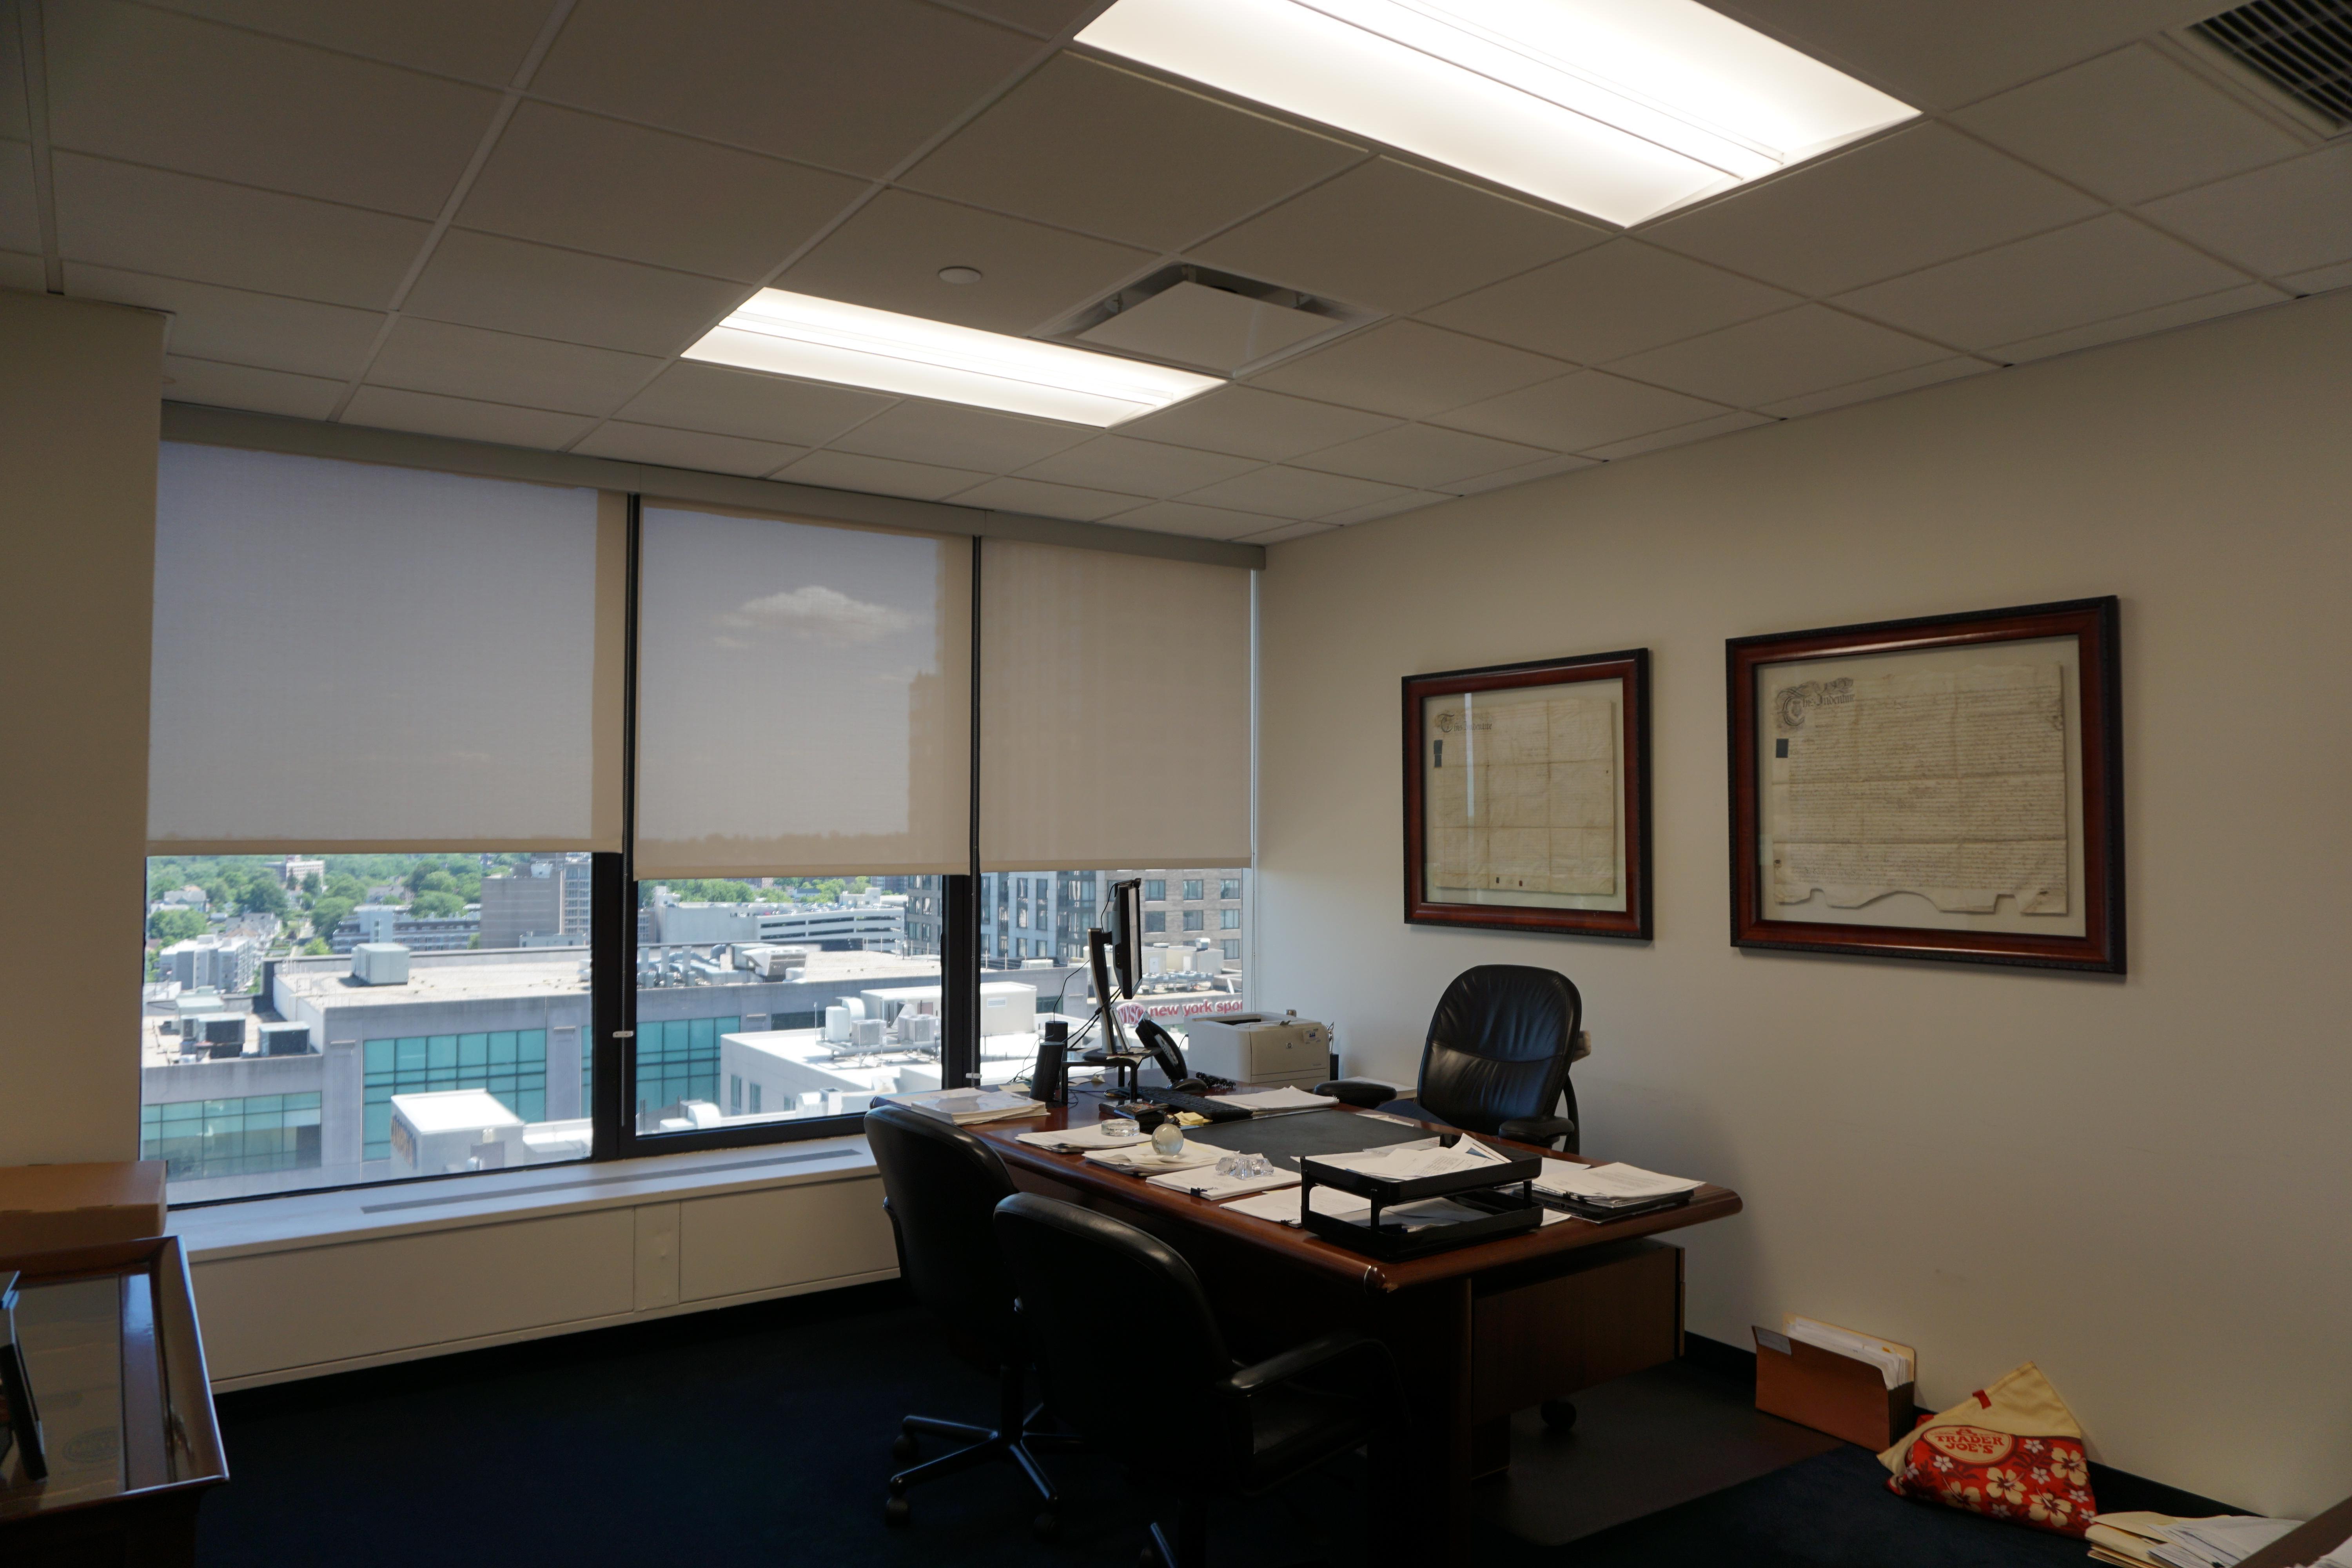 One North Broadway White Plains NY 3 window Office